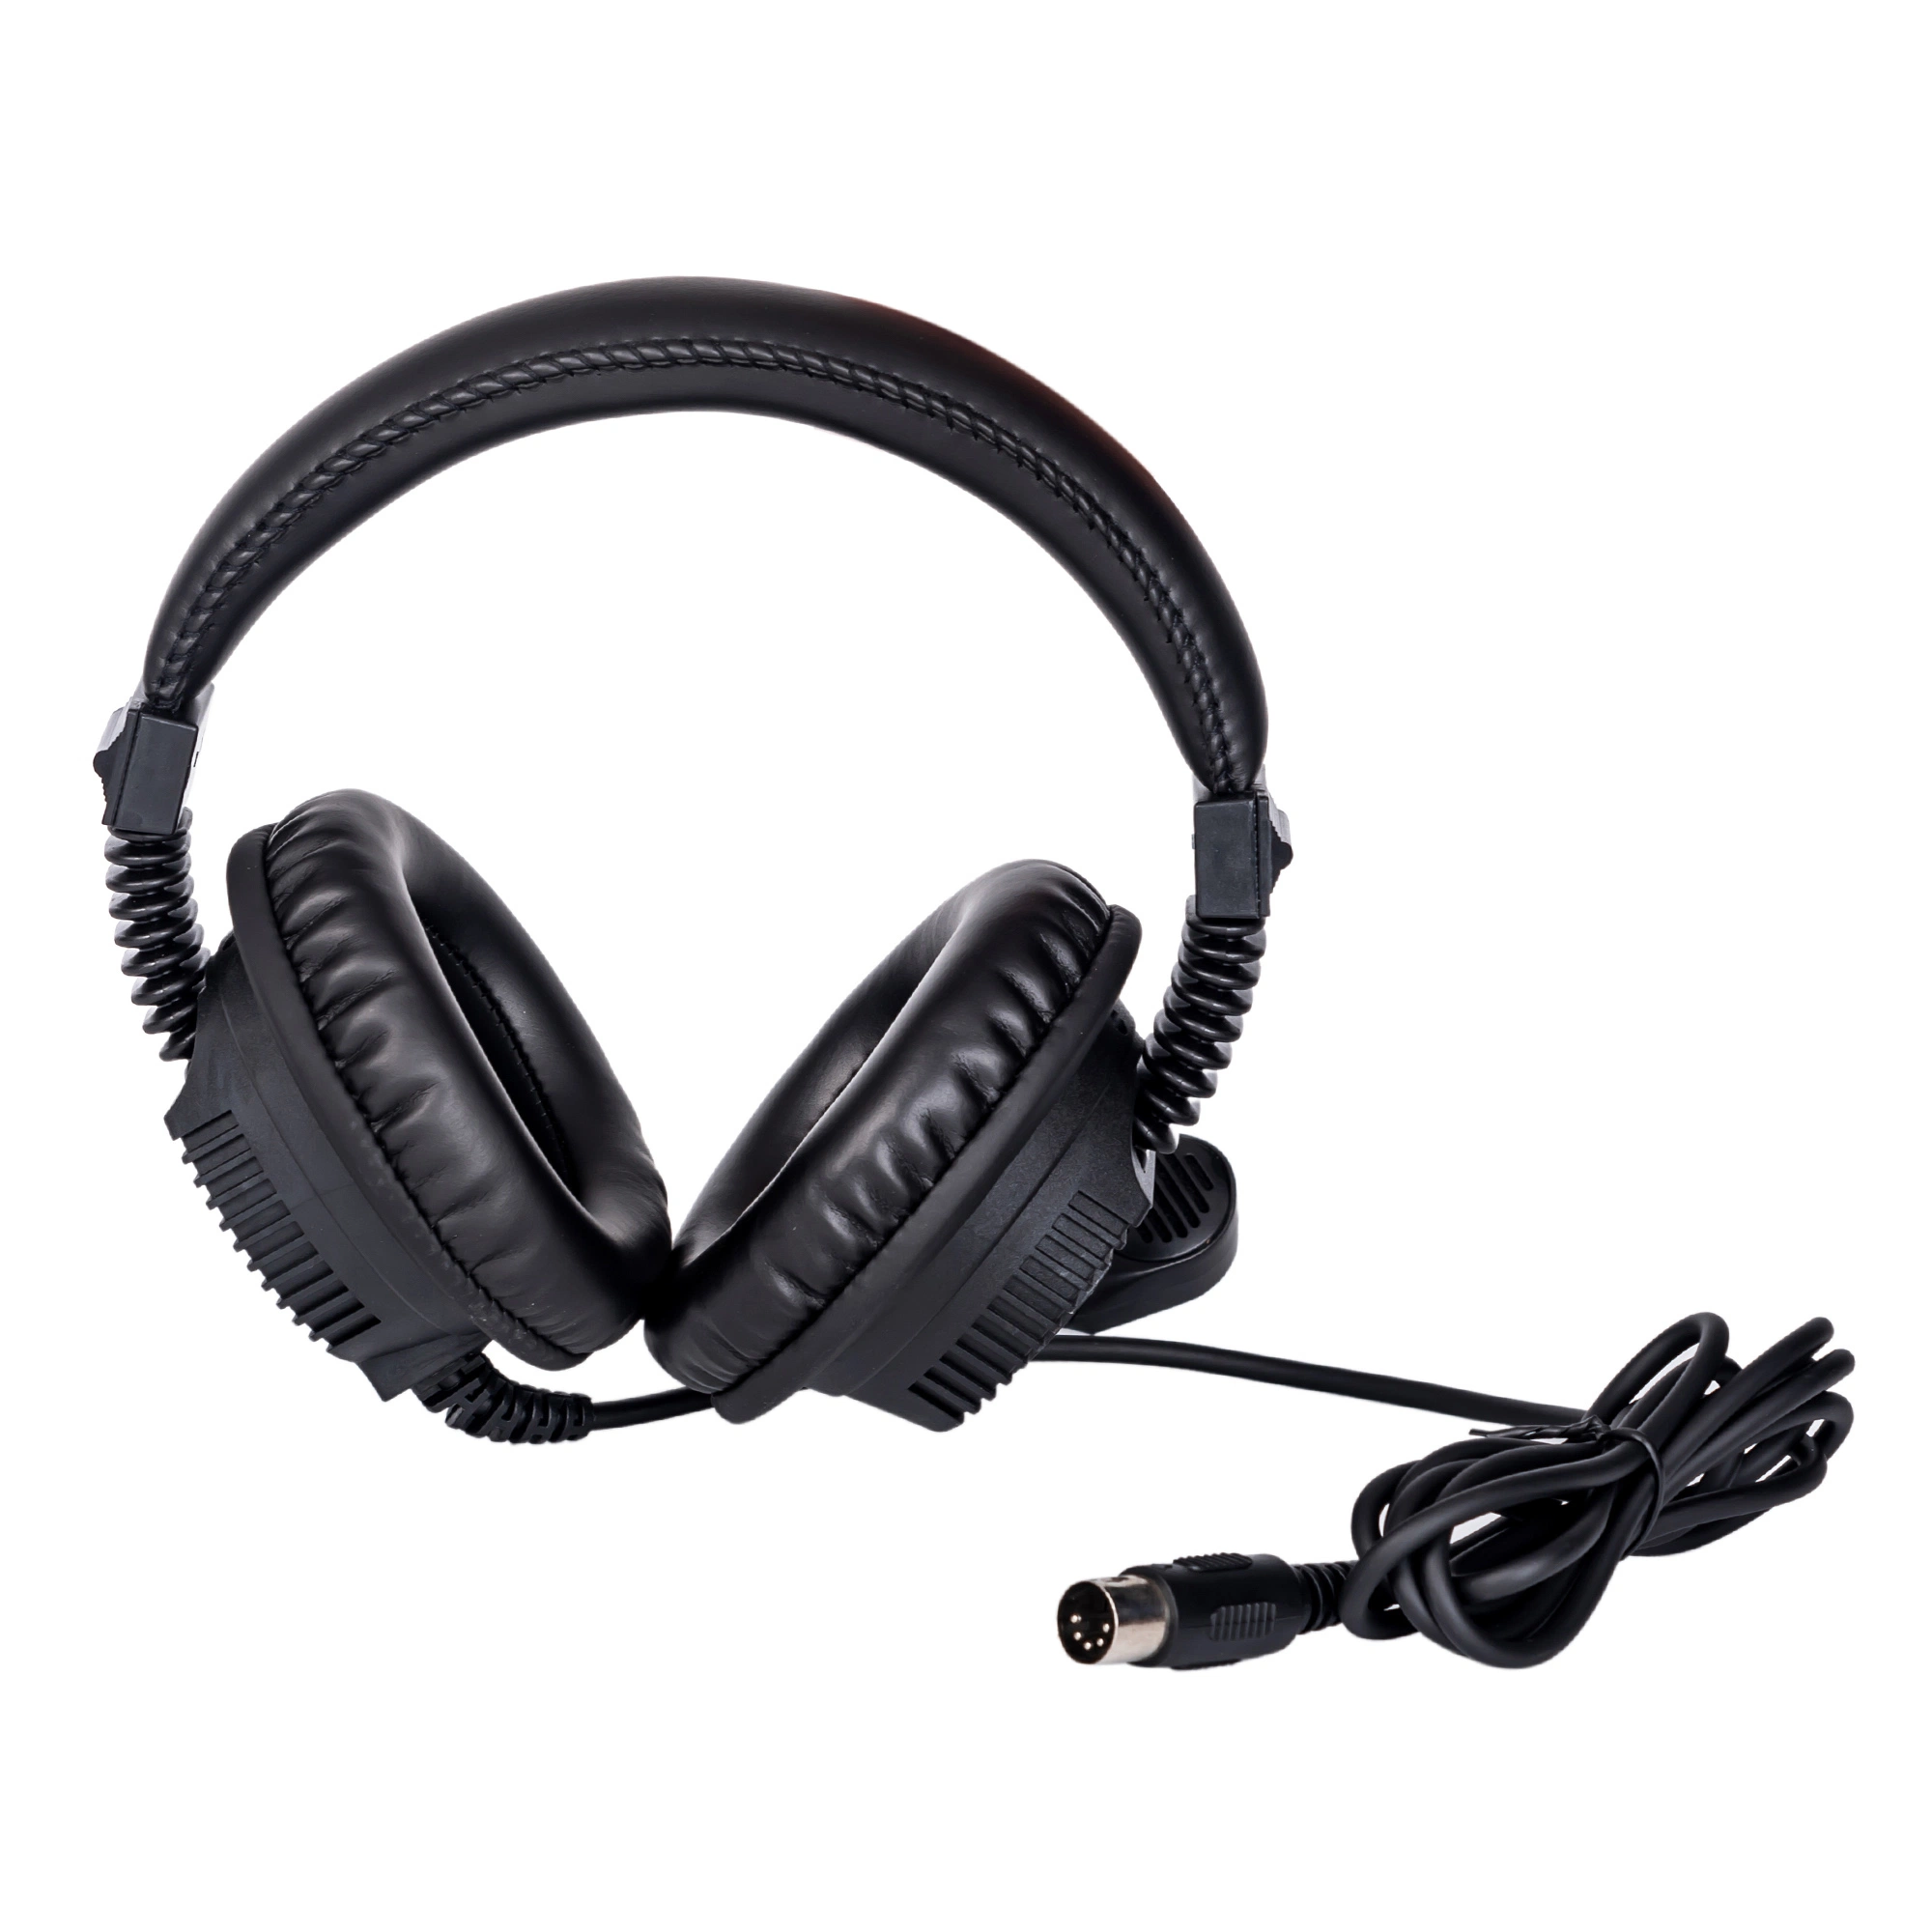 New Language Lab Headset Computer Lab English Learning High Quality Noise Cancelling Headset Audio Handling: Stereo/Mono Headphone Mastero Headset for School